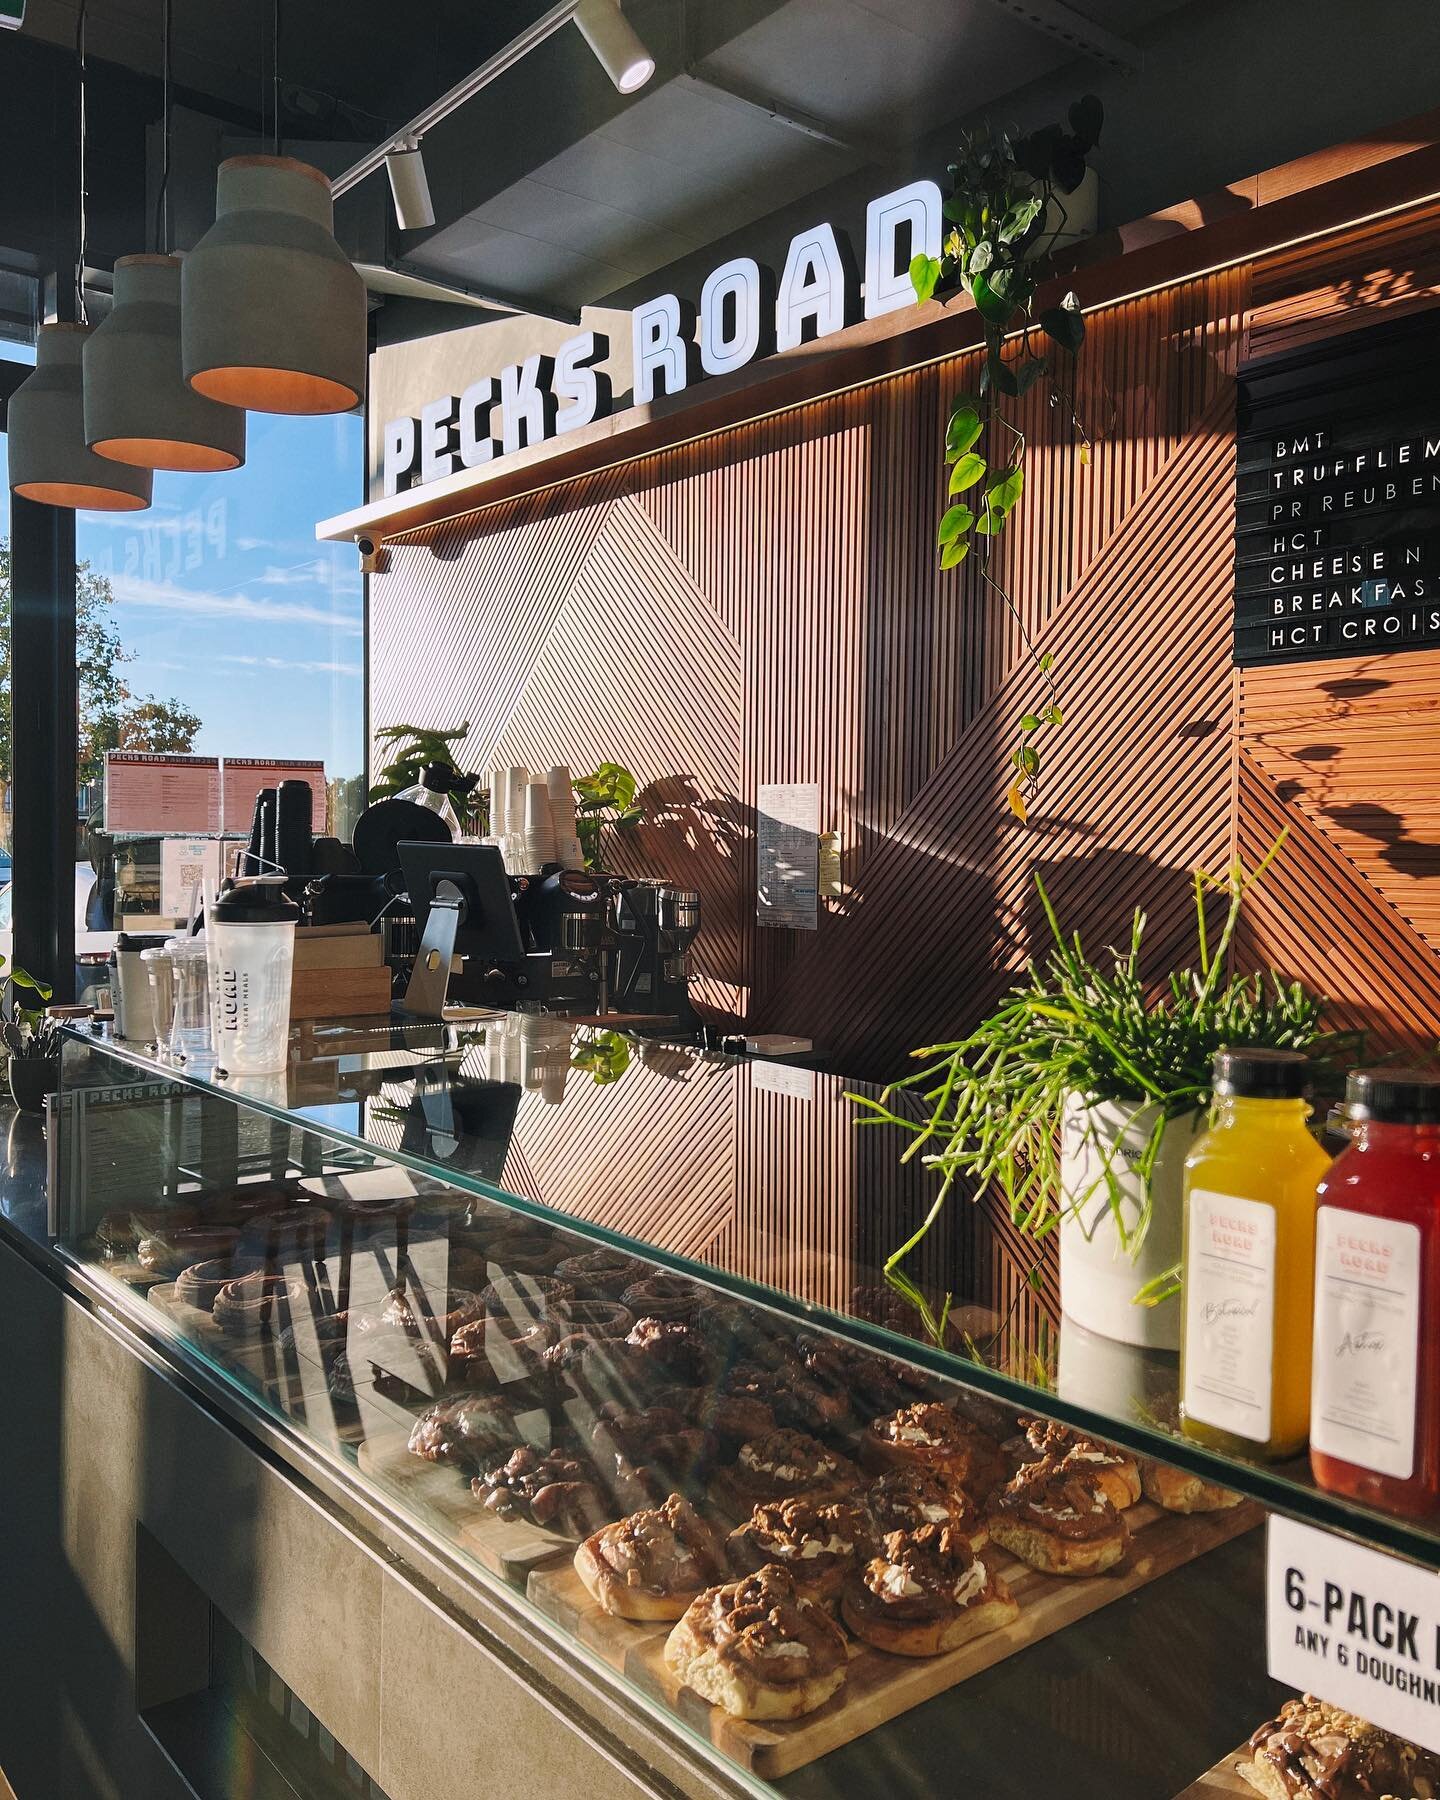 Rise &amp; shine Melbz ☀️

Doughnuts, coffee and deli sandwiches ready and waiting for you this glorious Sunday morning 👌🏽

Open 8am - 5pm every day.

See you at Pecks Road !

Shop A6, 1-7 Caroline Springs Blvd, Caroline Springs 3023

🍩☕️🍩